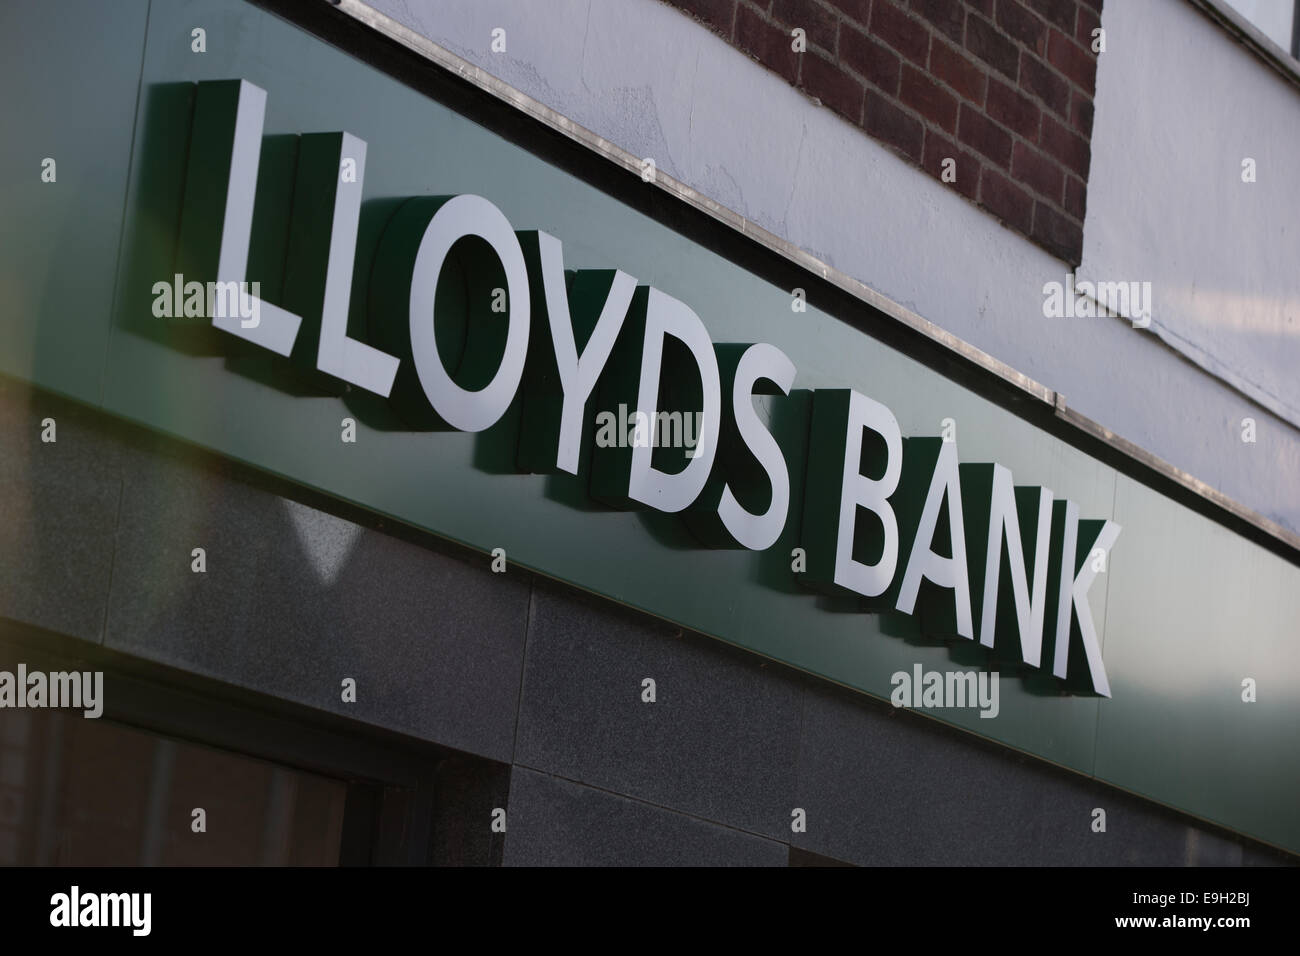 Newport Pagnell, Buckinghamshire, UK. 28th October, 2014. Lloyds Bank confirms 9,000 job losses and the closure of 150 branches over the next three years. Credit:  Chris Yates/Alamy Live News Stock Photo